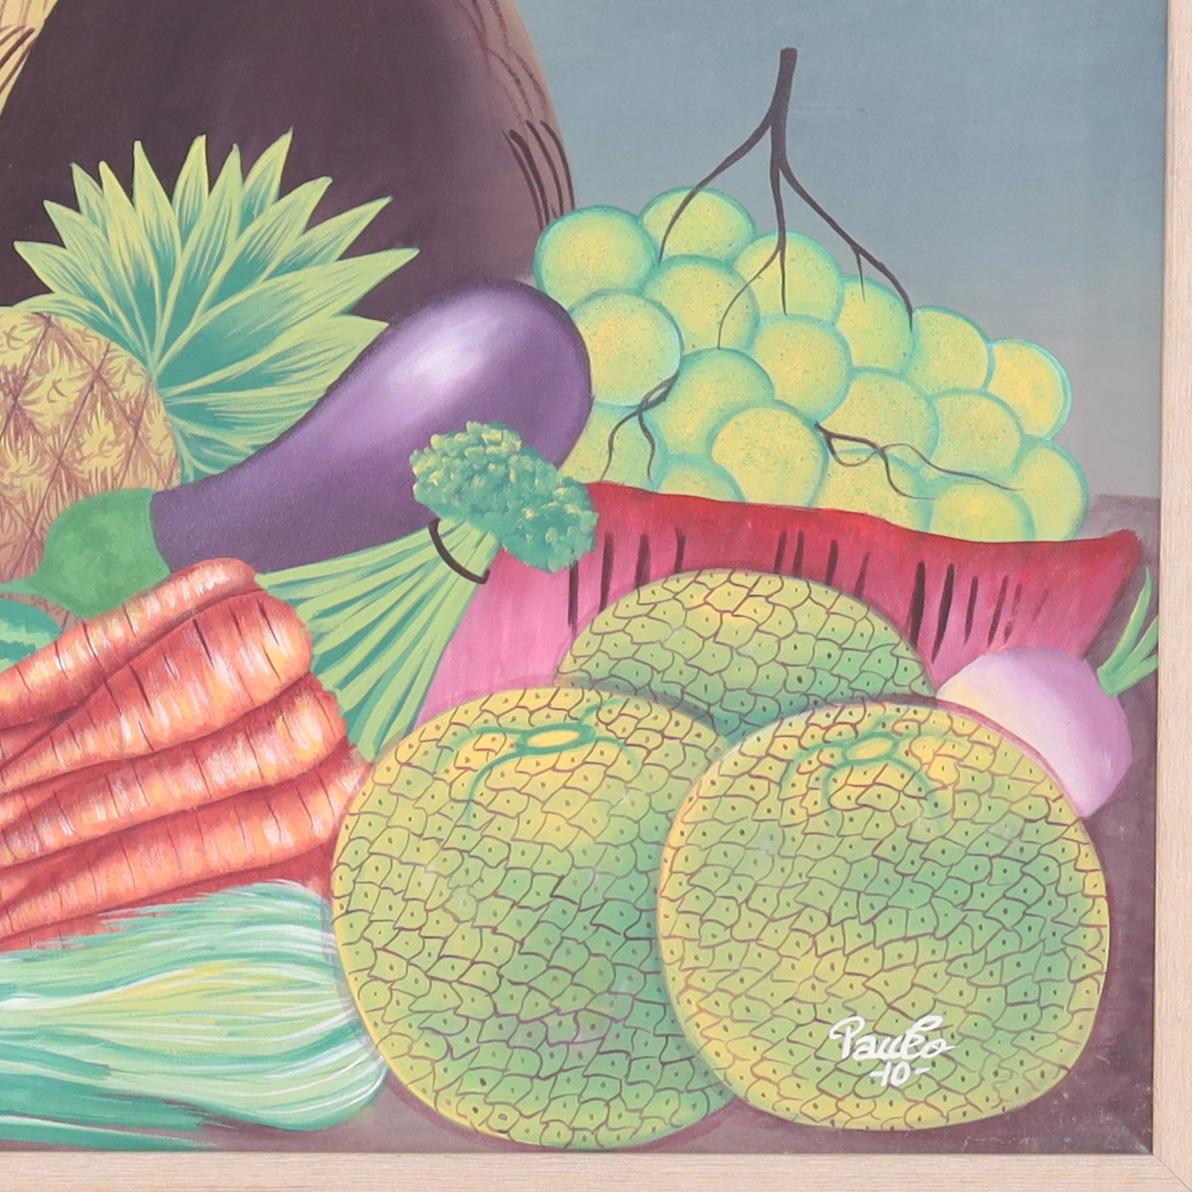 Striking Haitian acrylic painting on canvas depicting a colorful healthy array of fruits and vegetables executed in a distinctive naive style. Signed Paulo in the lower right and presented in a wood frame.